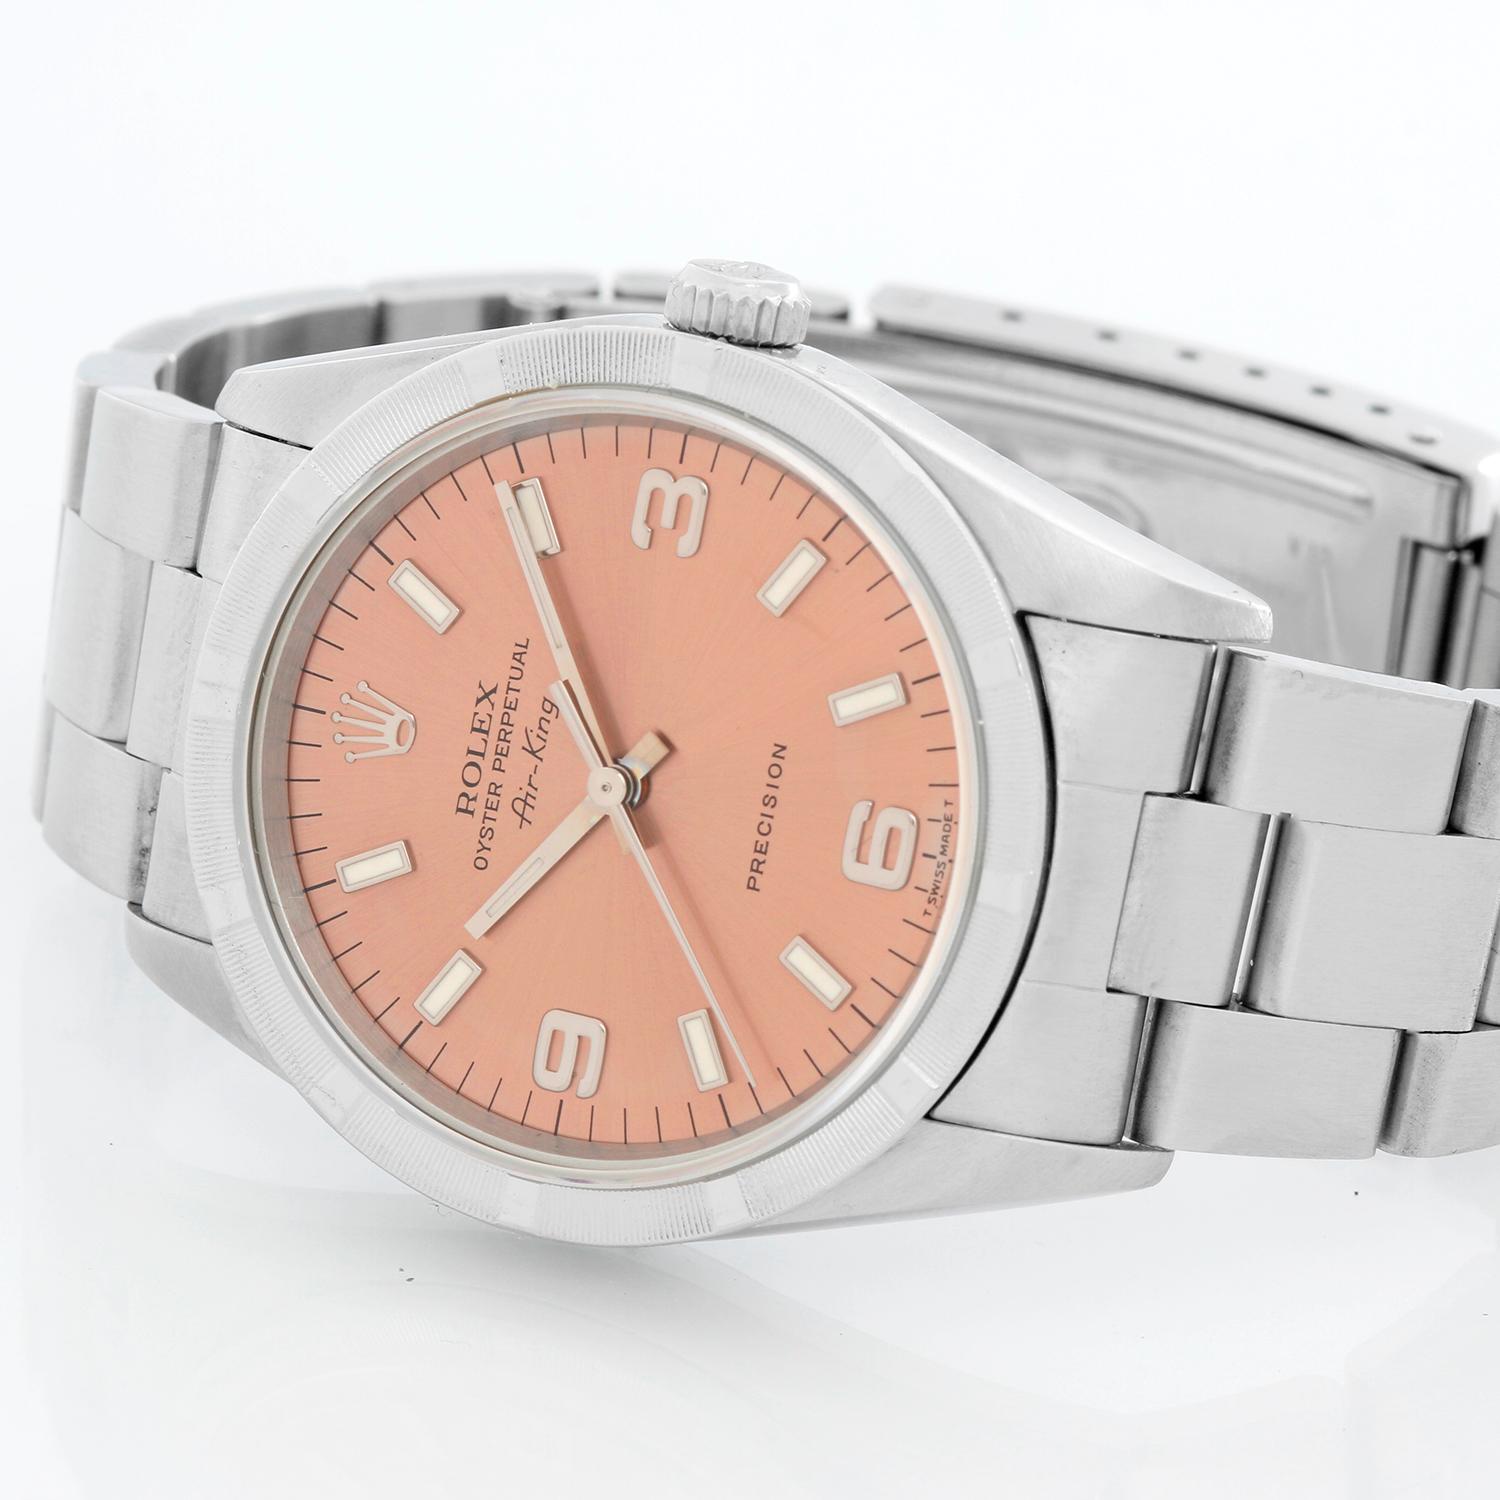 Rolex Air King Stainless Steel Men's Watch 14010 - Automatic winding. Stainless Steel ( 36 mm ). Rose dial with white stick hour markers. Stainless Steel Oyster bracelet. Pre-owned with box .